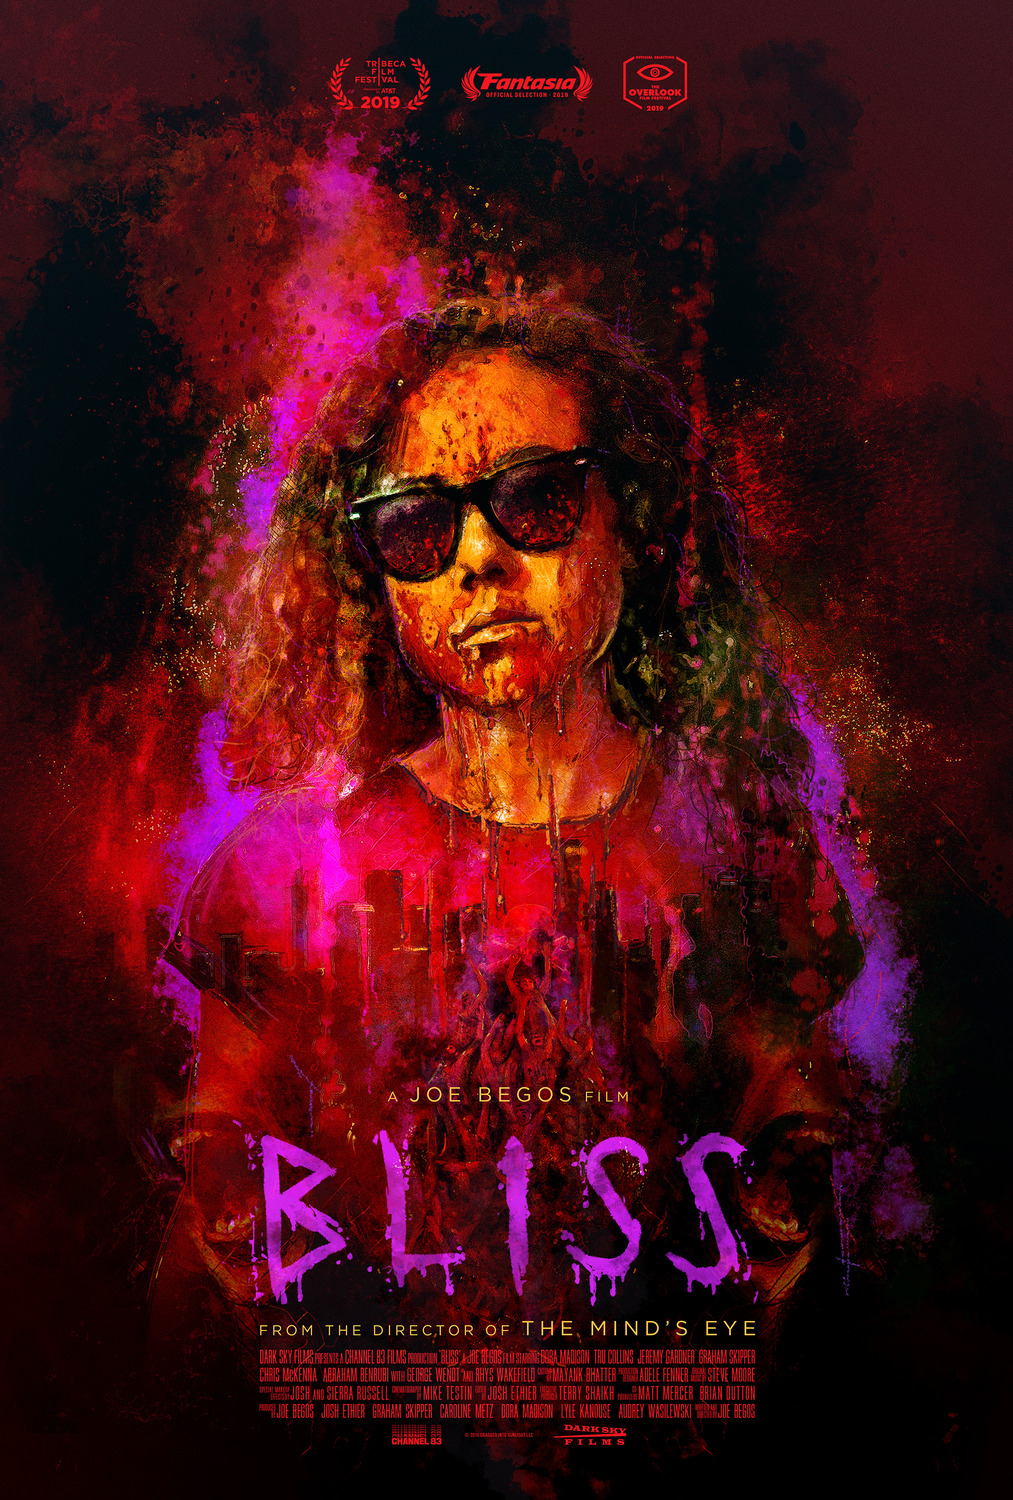 Extra Large Movie Poster Image for Bliss 